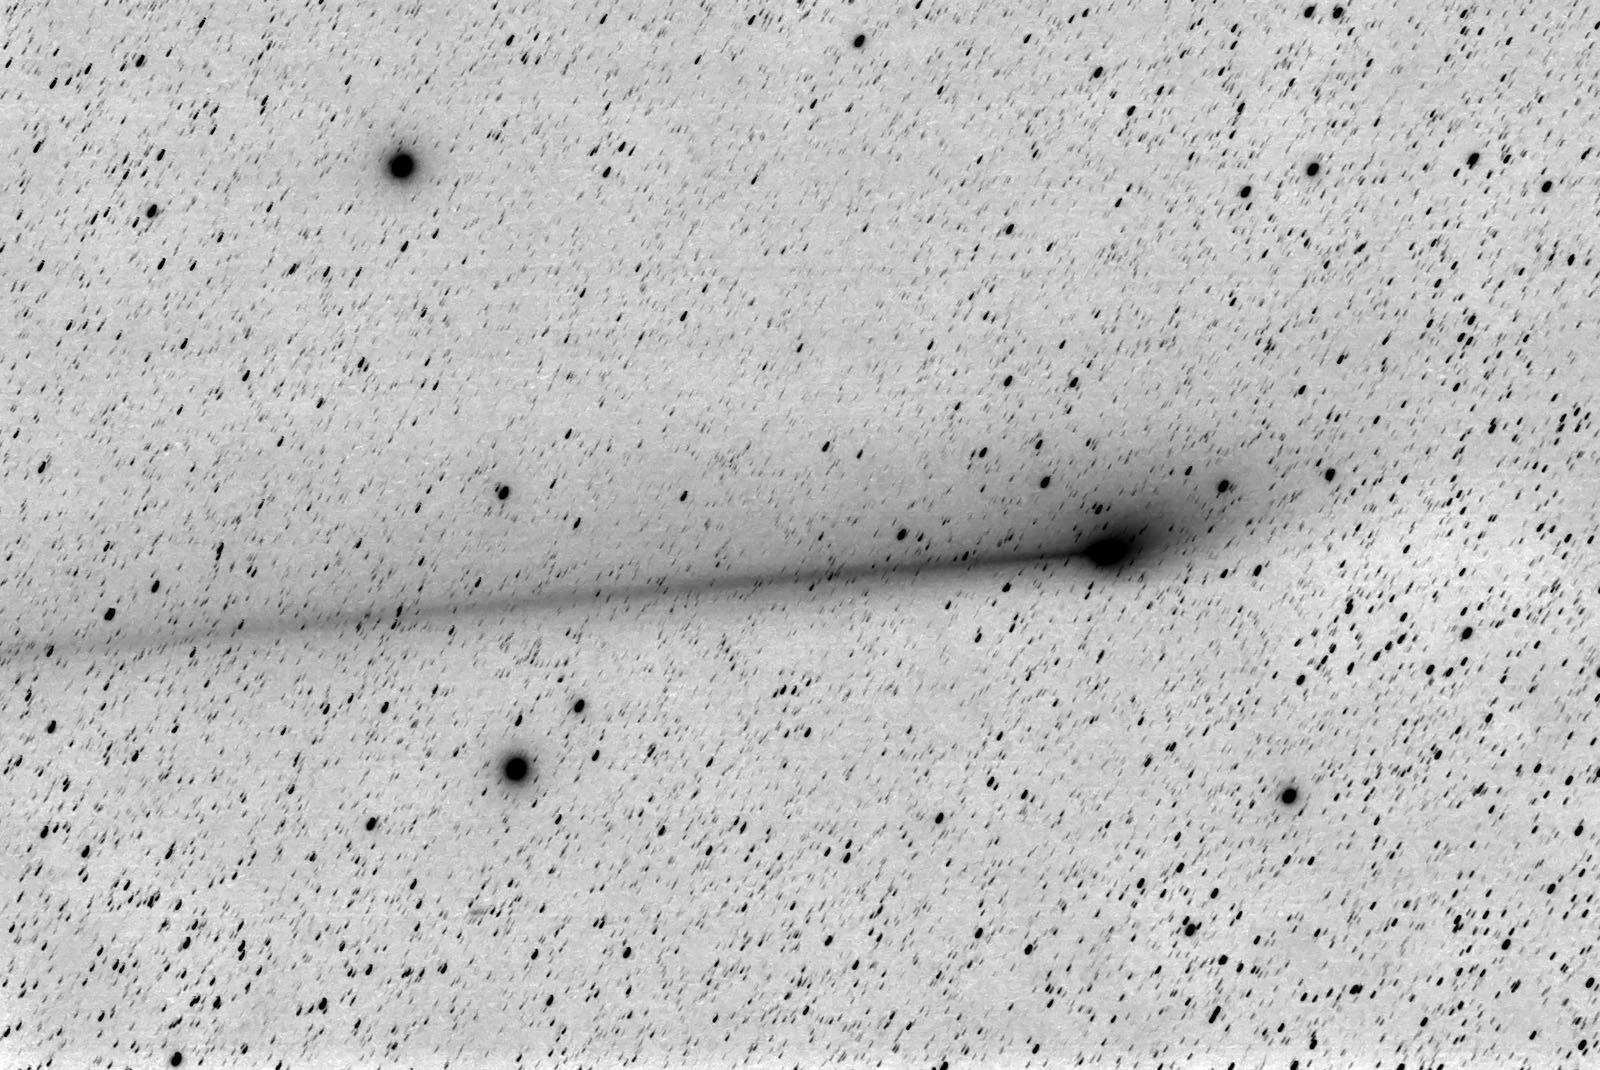 A negative image showing Comet PANSTARRS and its very thin anti tail, as seen on May 22, 2013 from near Payson, Arizona. Credit and copyright: Chris Schur. 